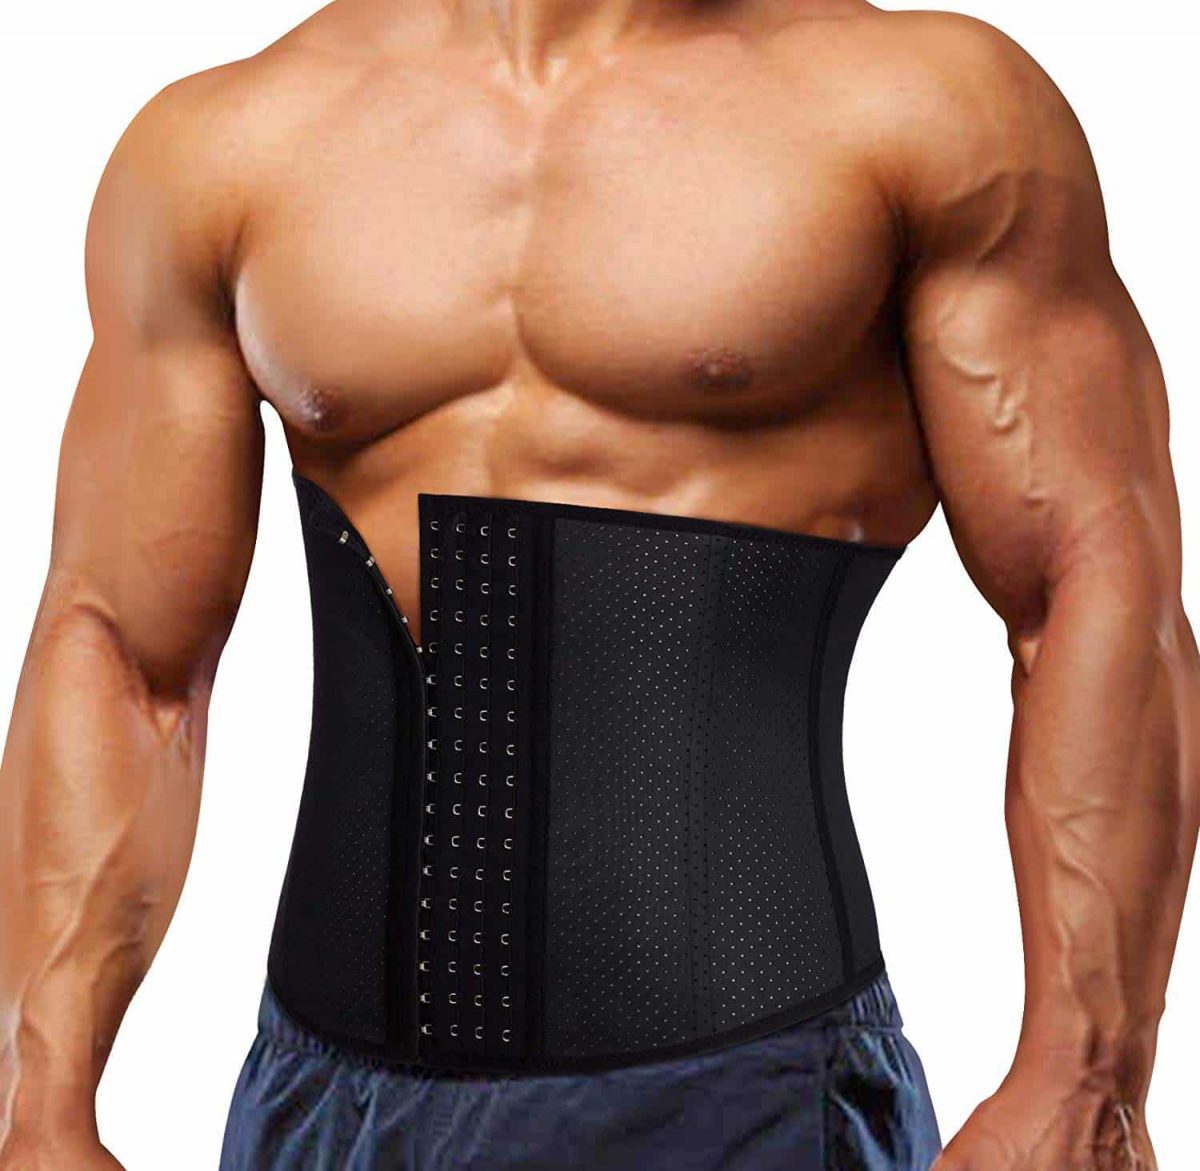 Top 10 Best Waist Training for Men in 2021 Reviews | Buyer's Guide